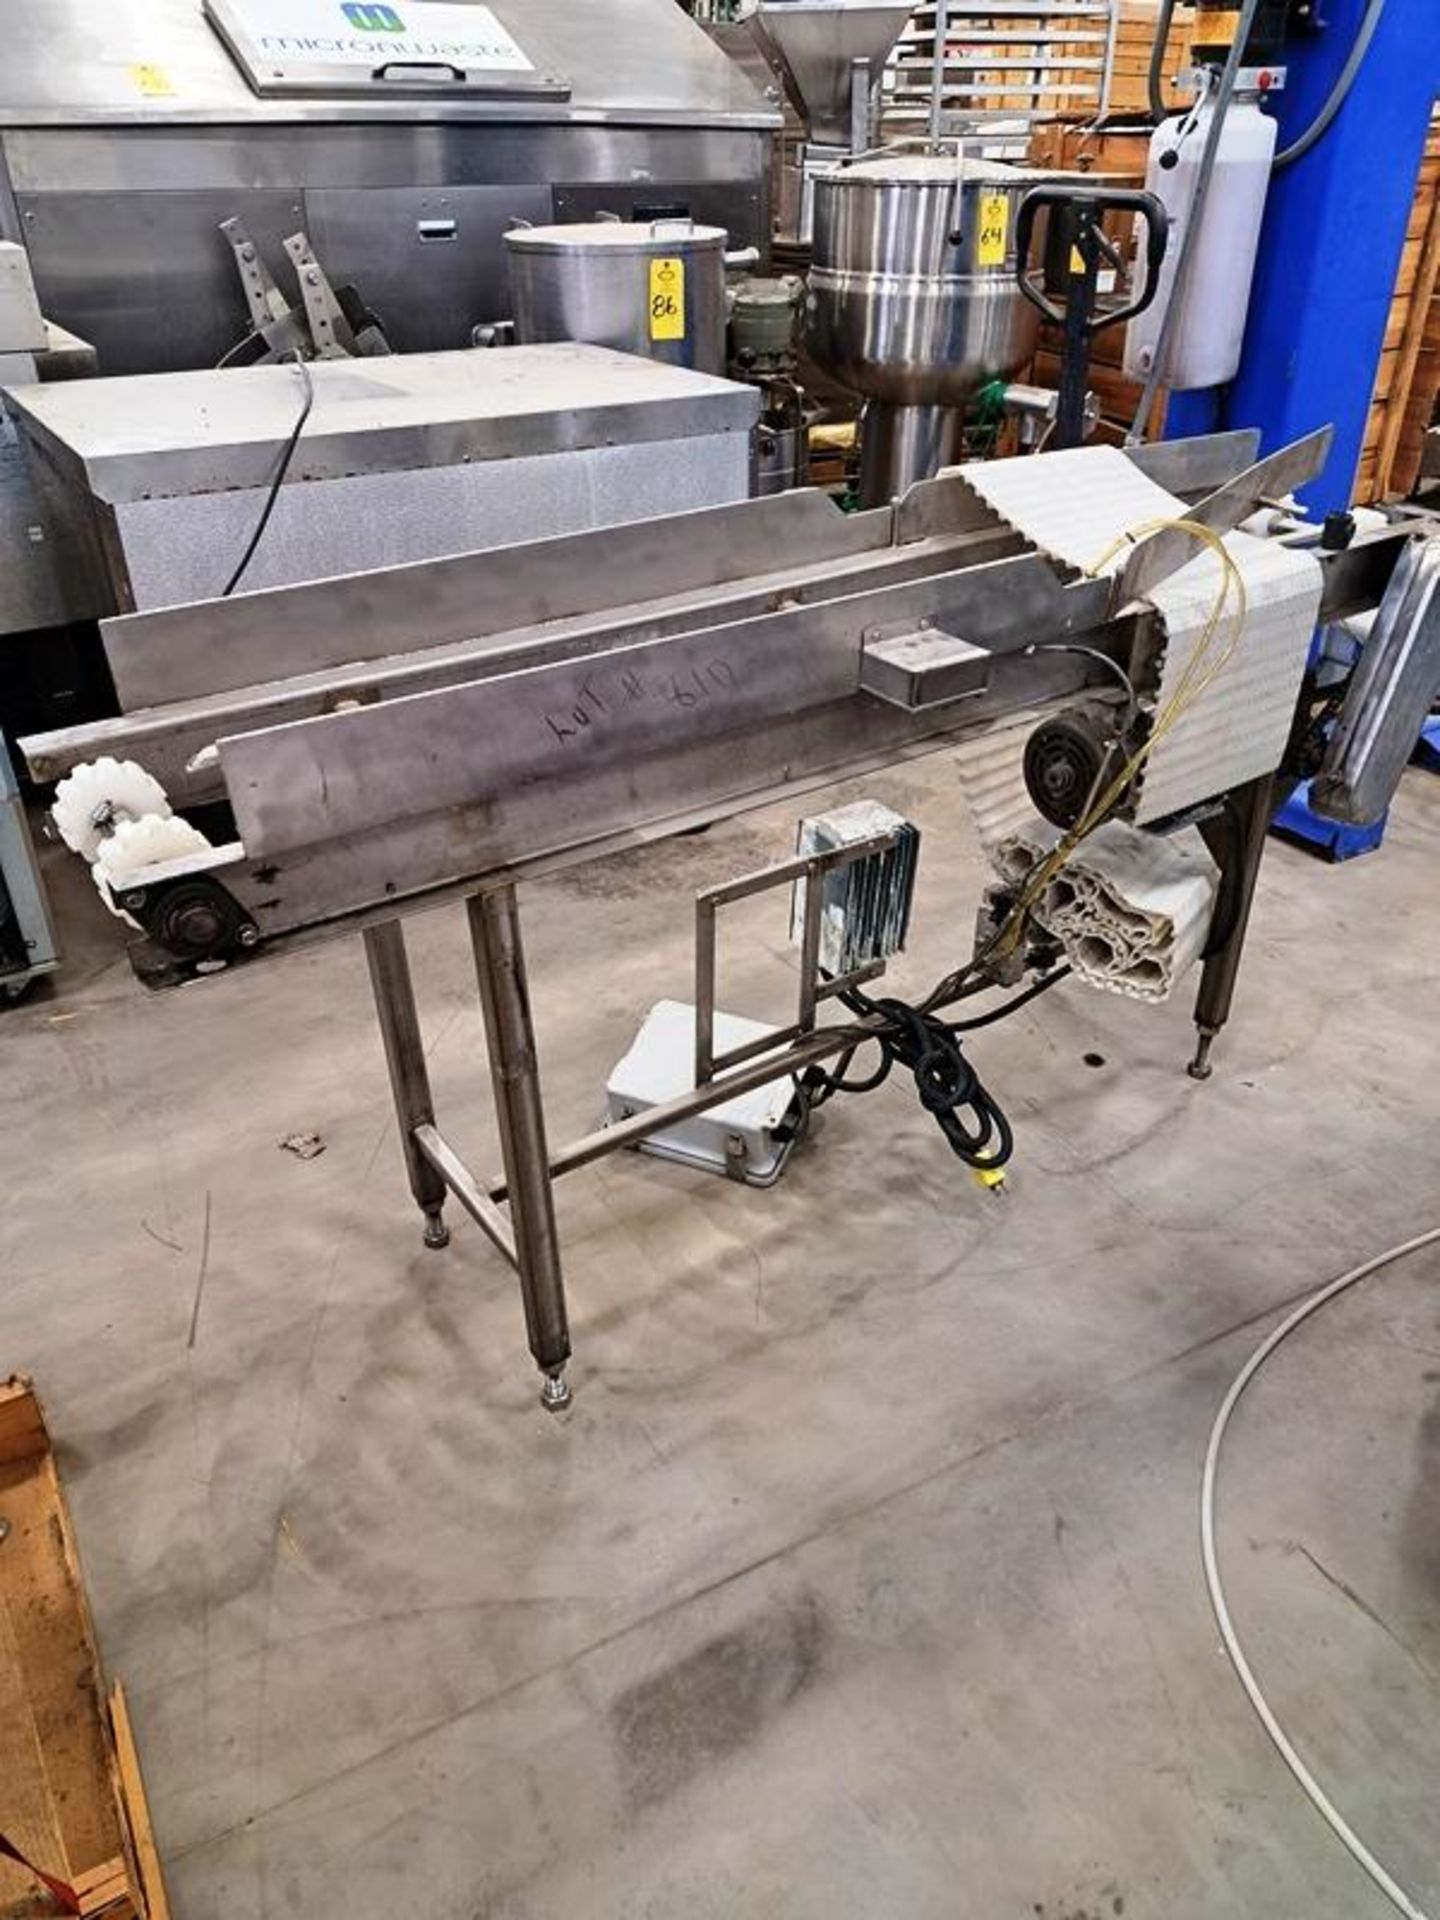 Stainless Steel Transfer Conveyor, 12" wide X 6' long plastic belt, SECO Bronco DC Speed Control ( - Image 2 of 2